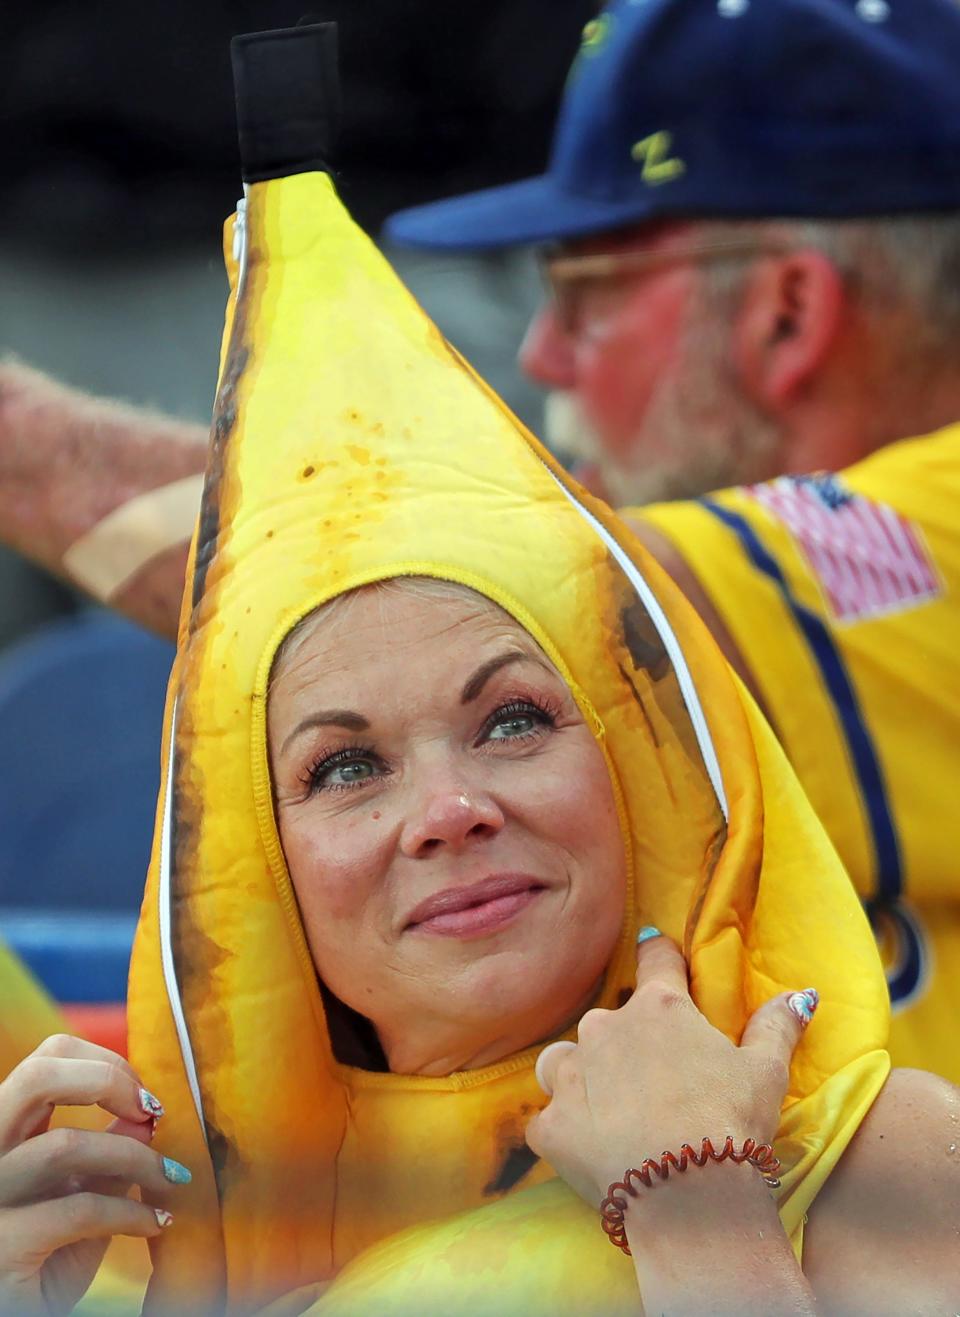 A fan watches the pregame show during the Savannah Bananas' World Tour at Canal Park Monday in Akron.